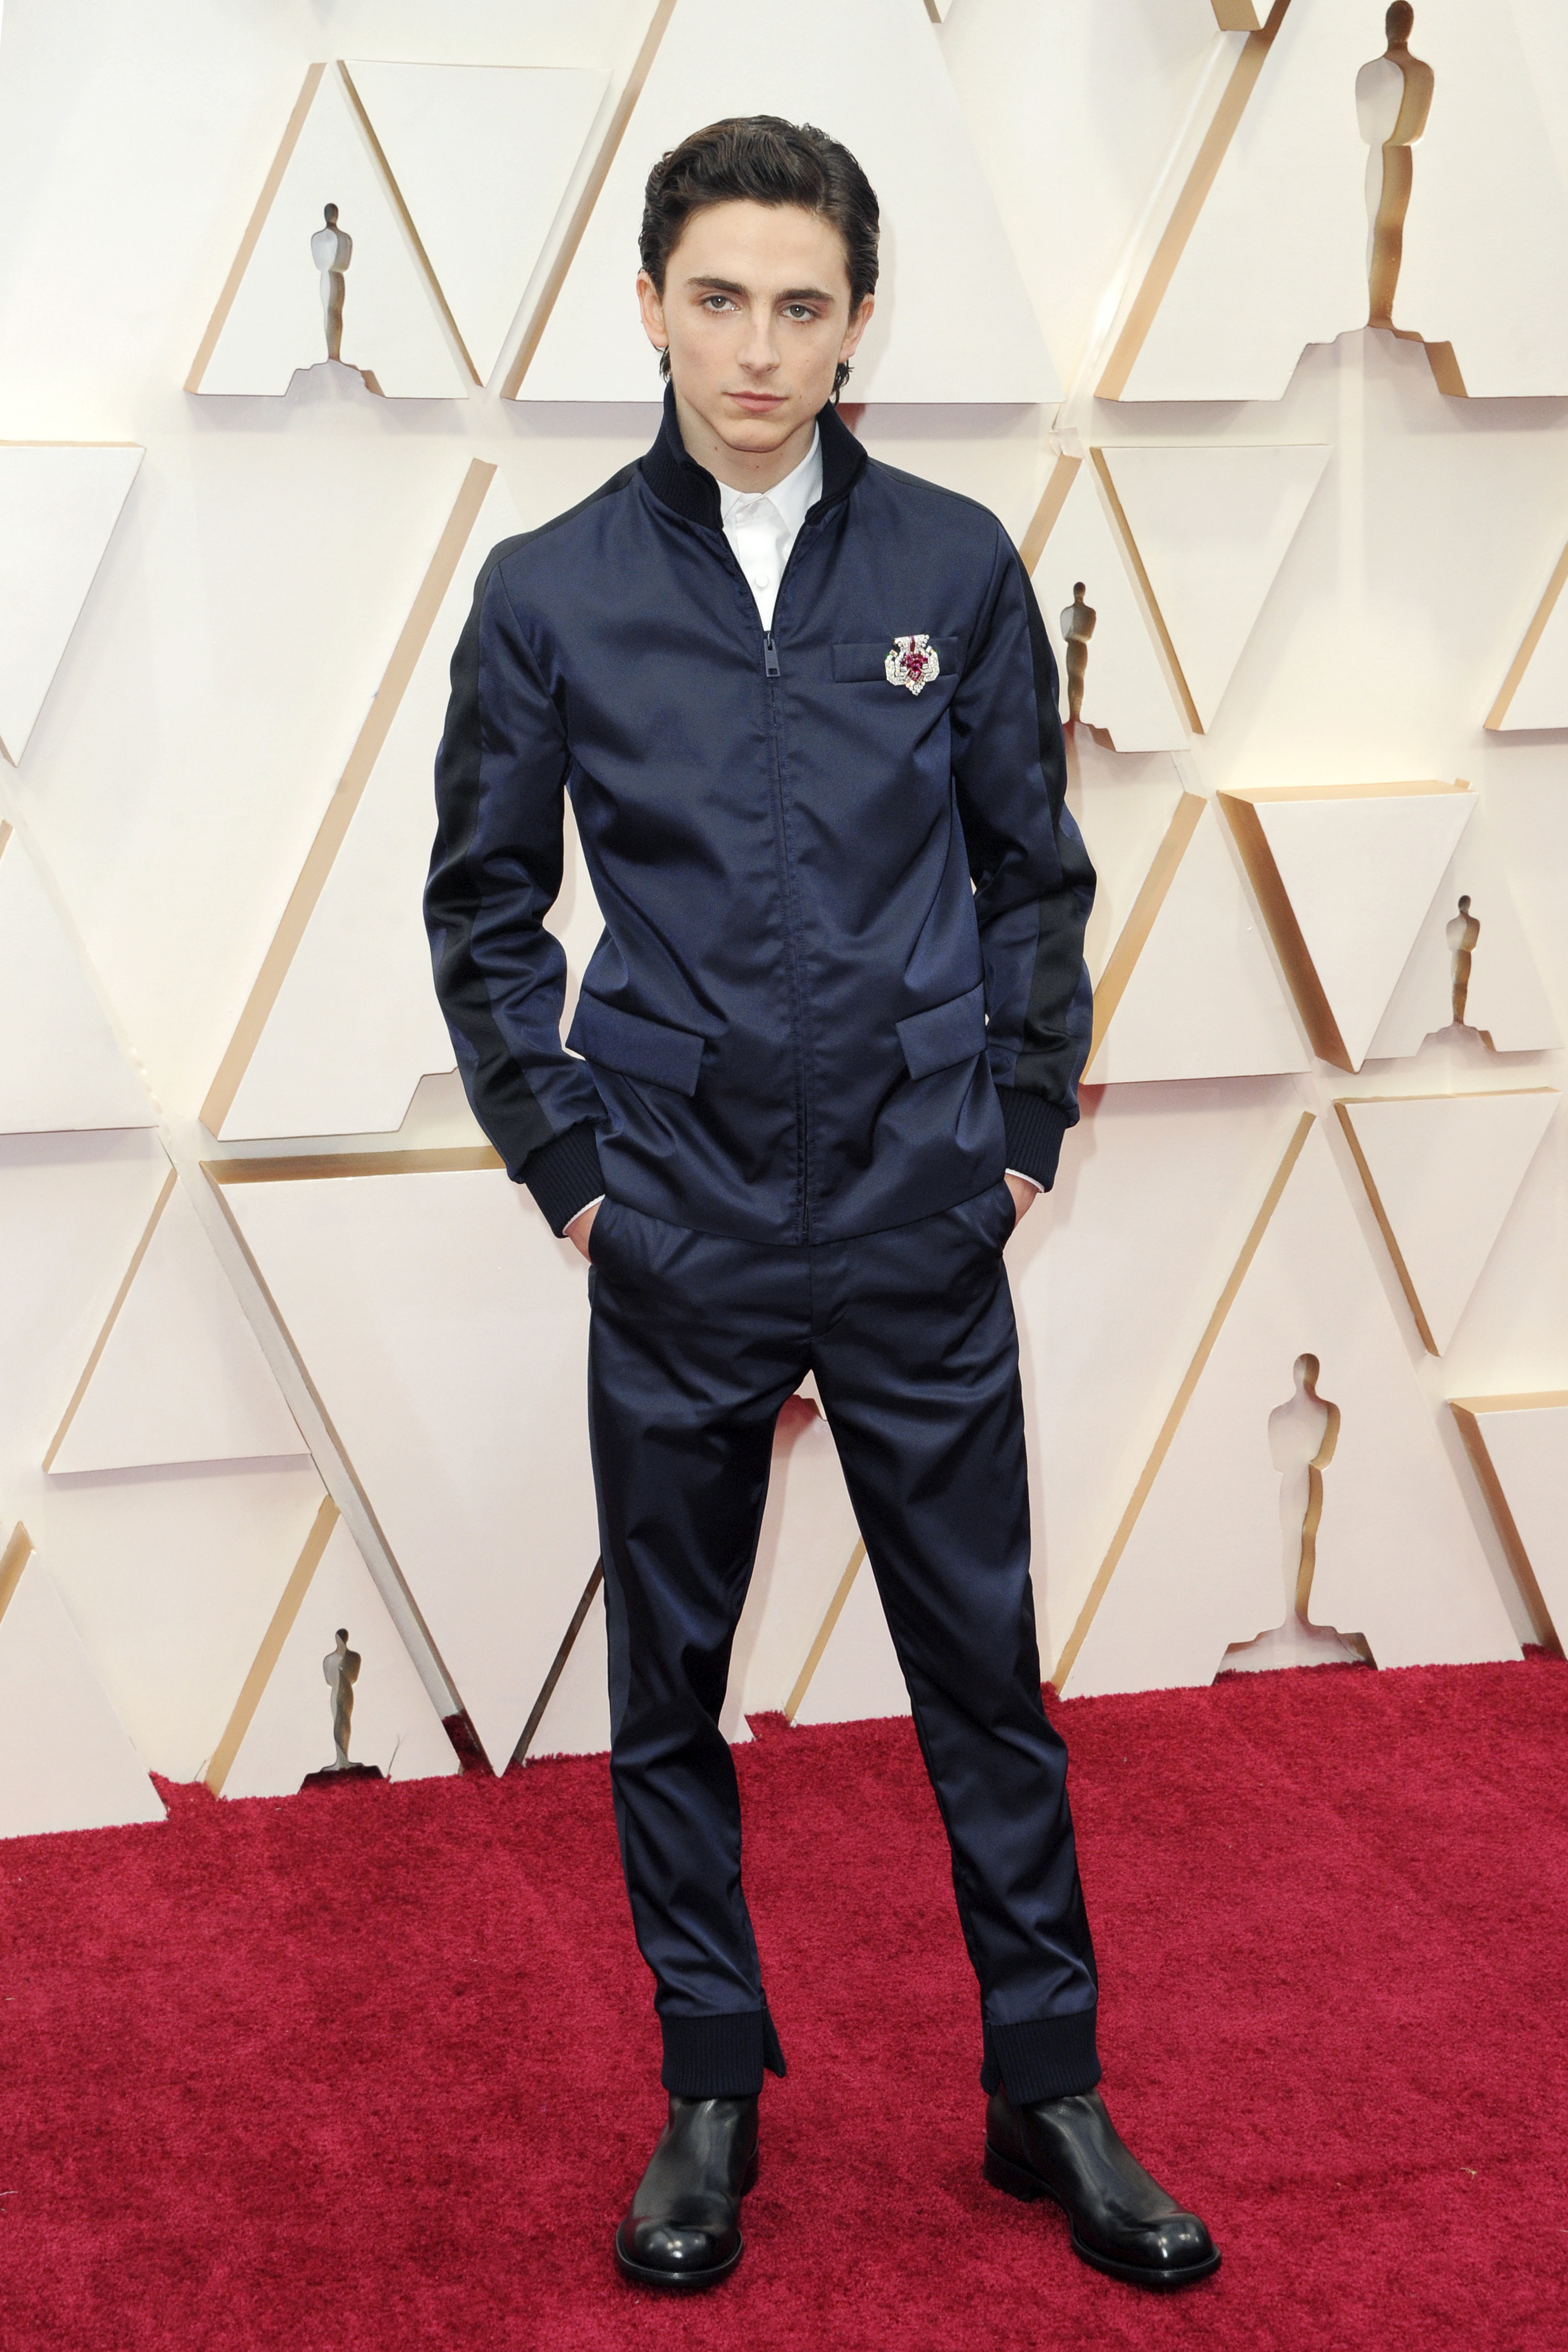 Timothée wears a navy nylon zip-up jacket and matching pants